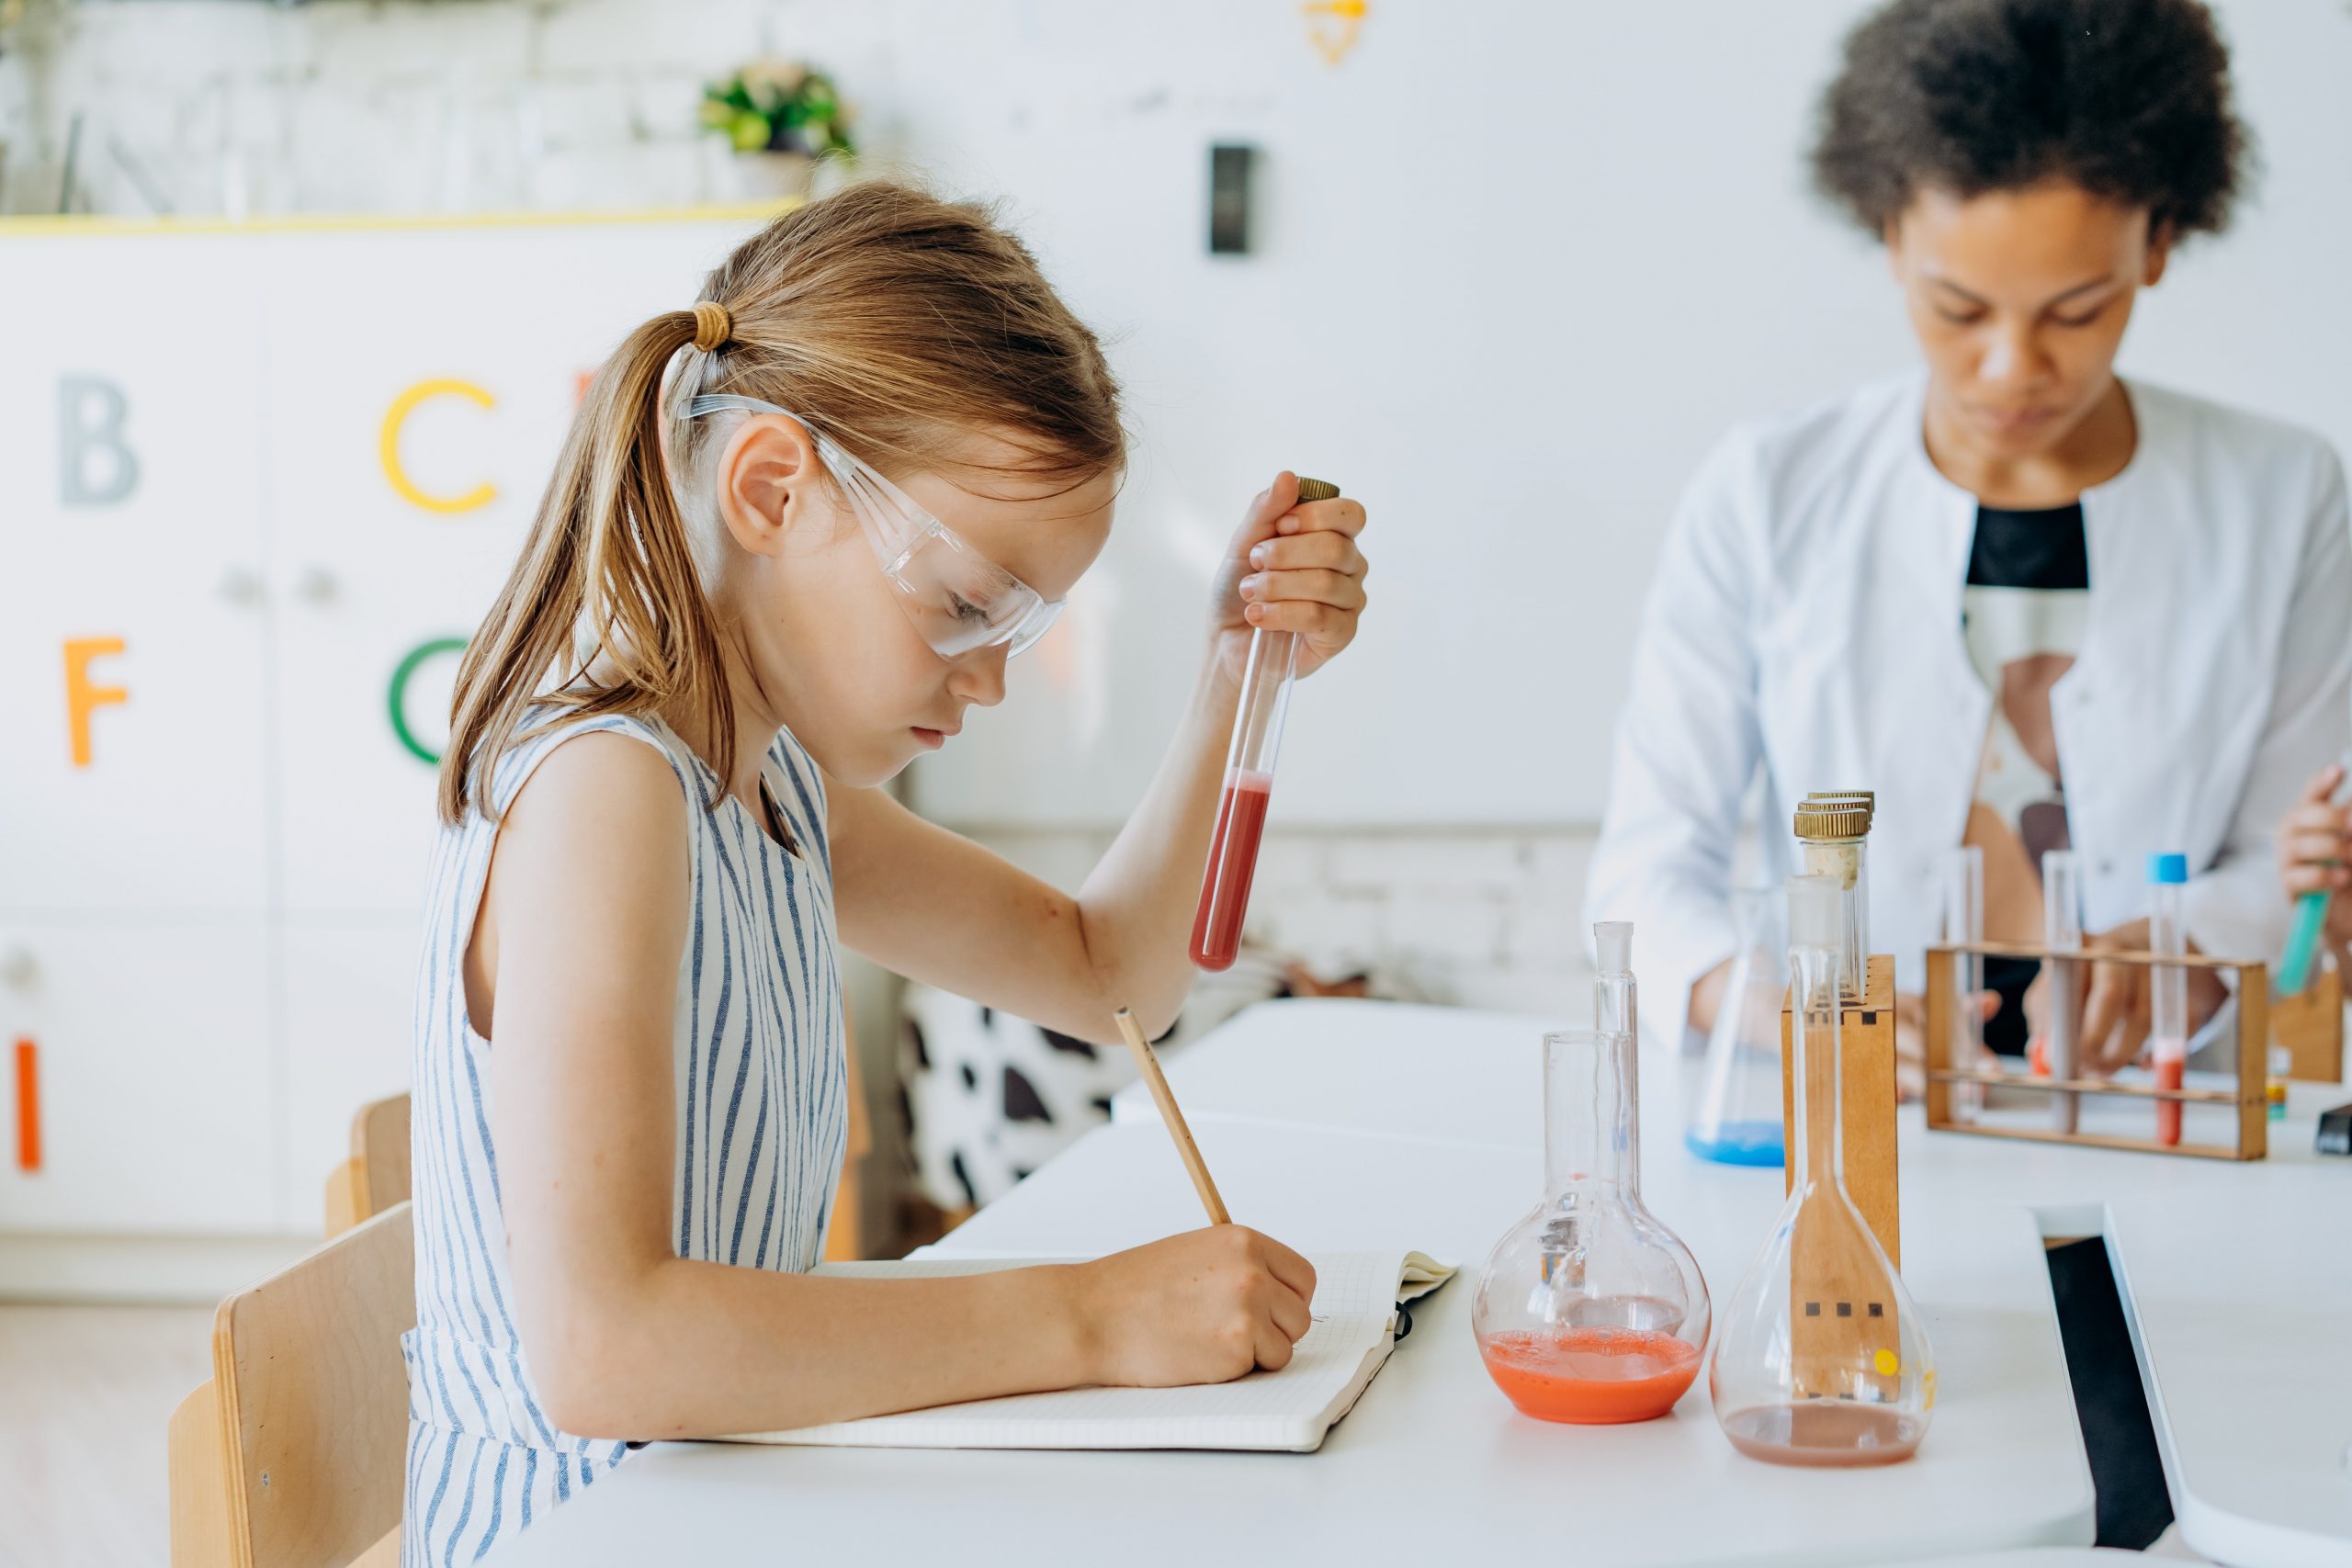 Tips to Get Your Kids Interested in Math and Science